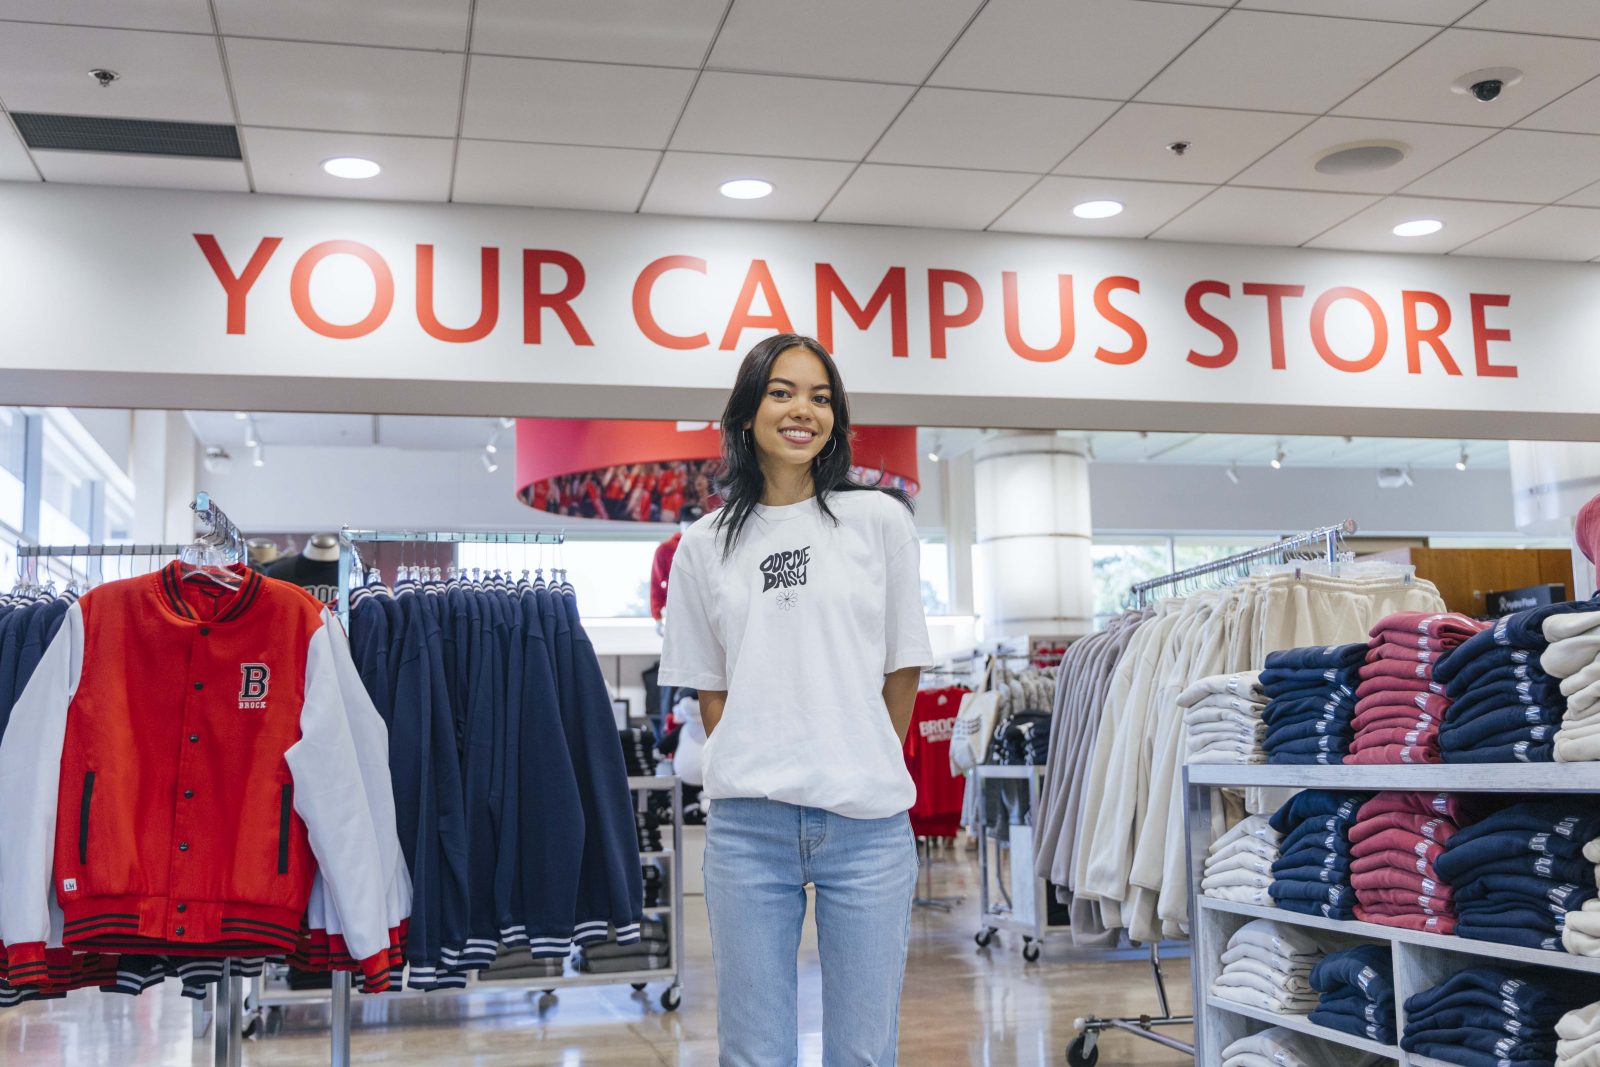 A young woman wearing a whit shirt and jeans stands in the Brock Campus Store surrounded by clothing displays.